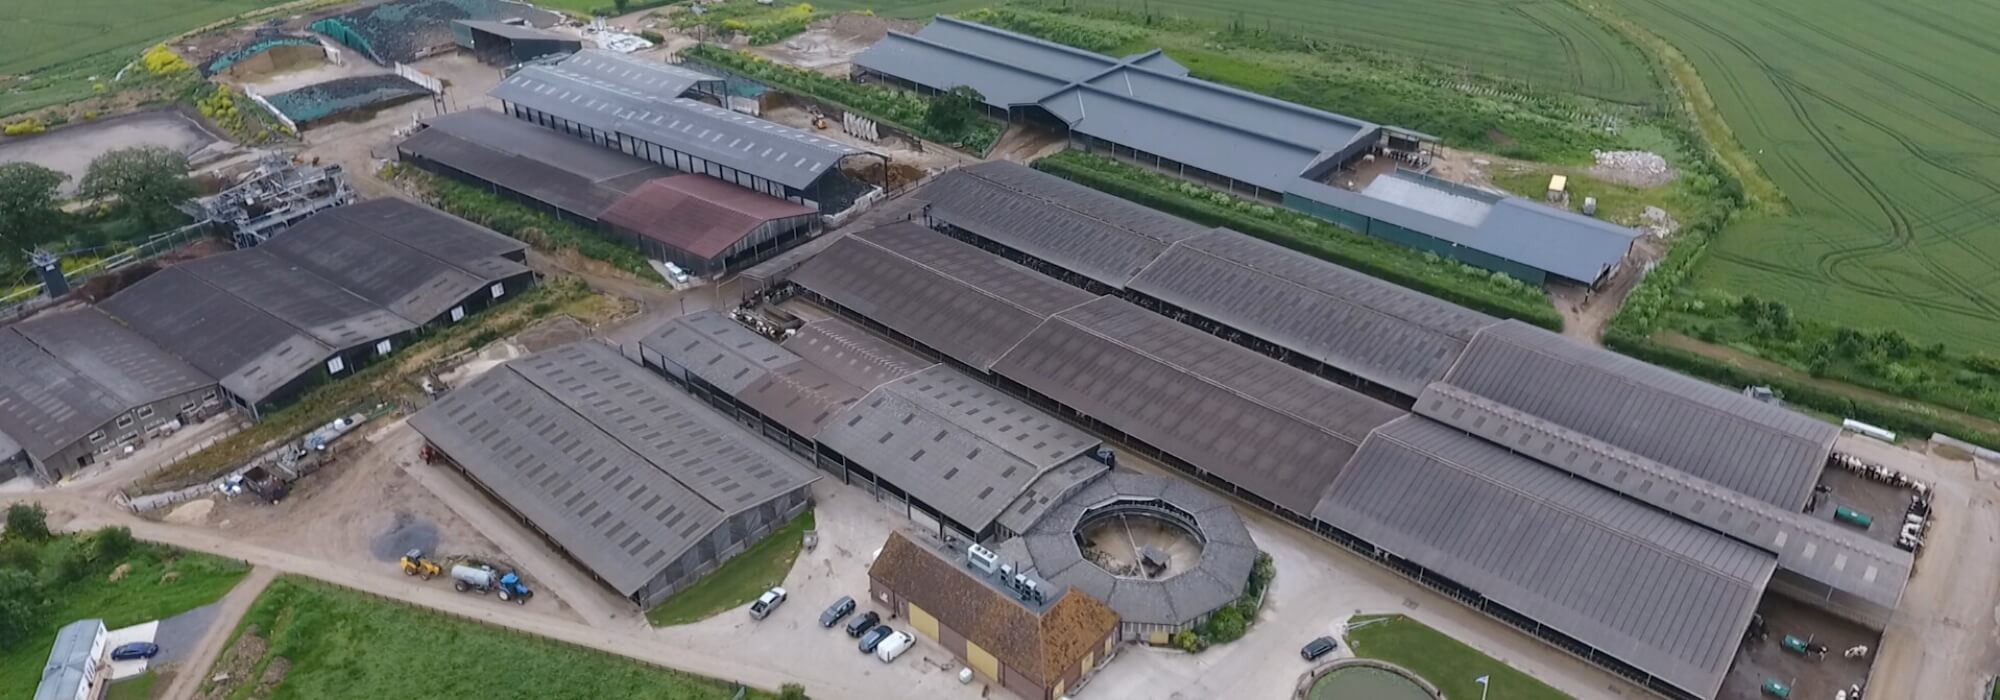 Very large factory farm surrounded by fields.